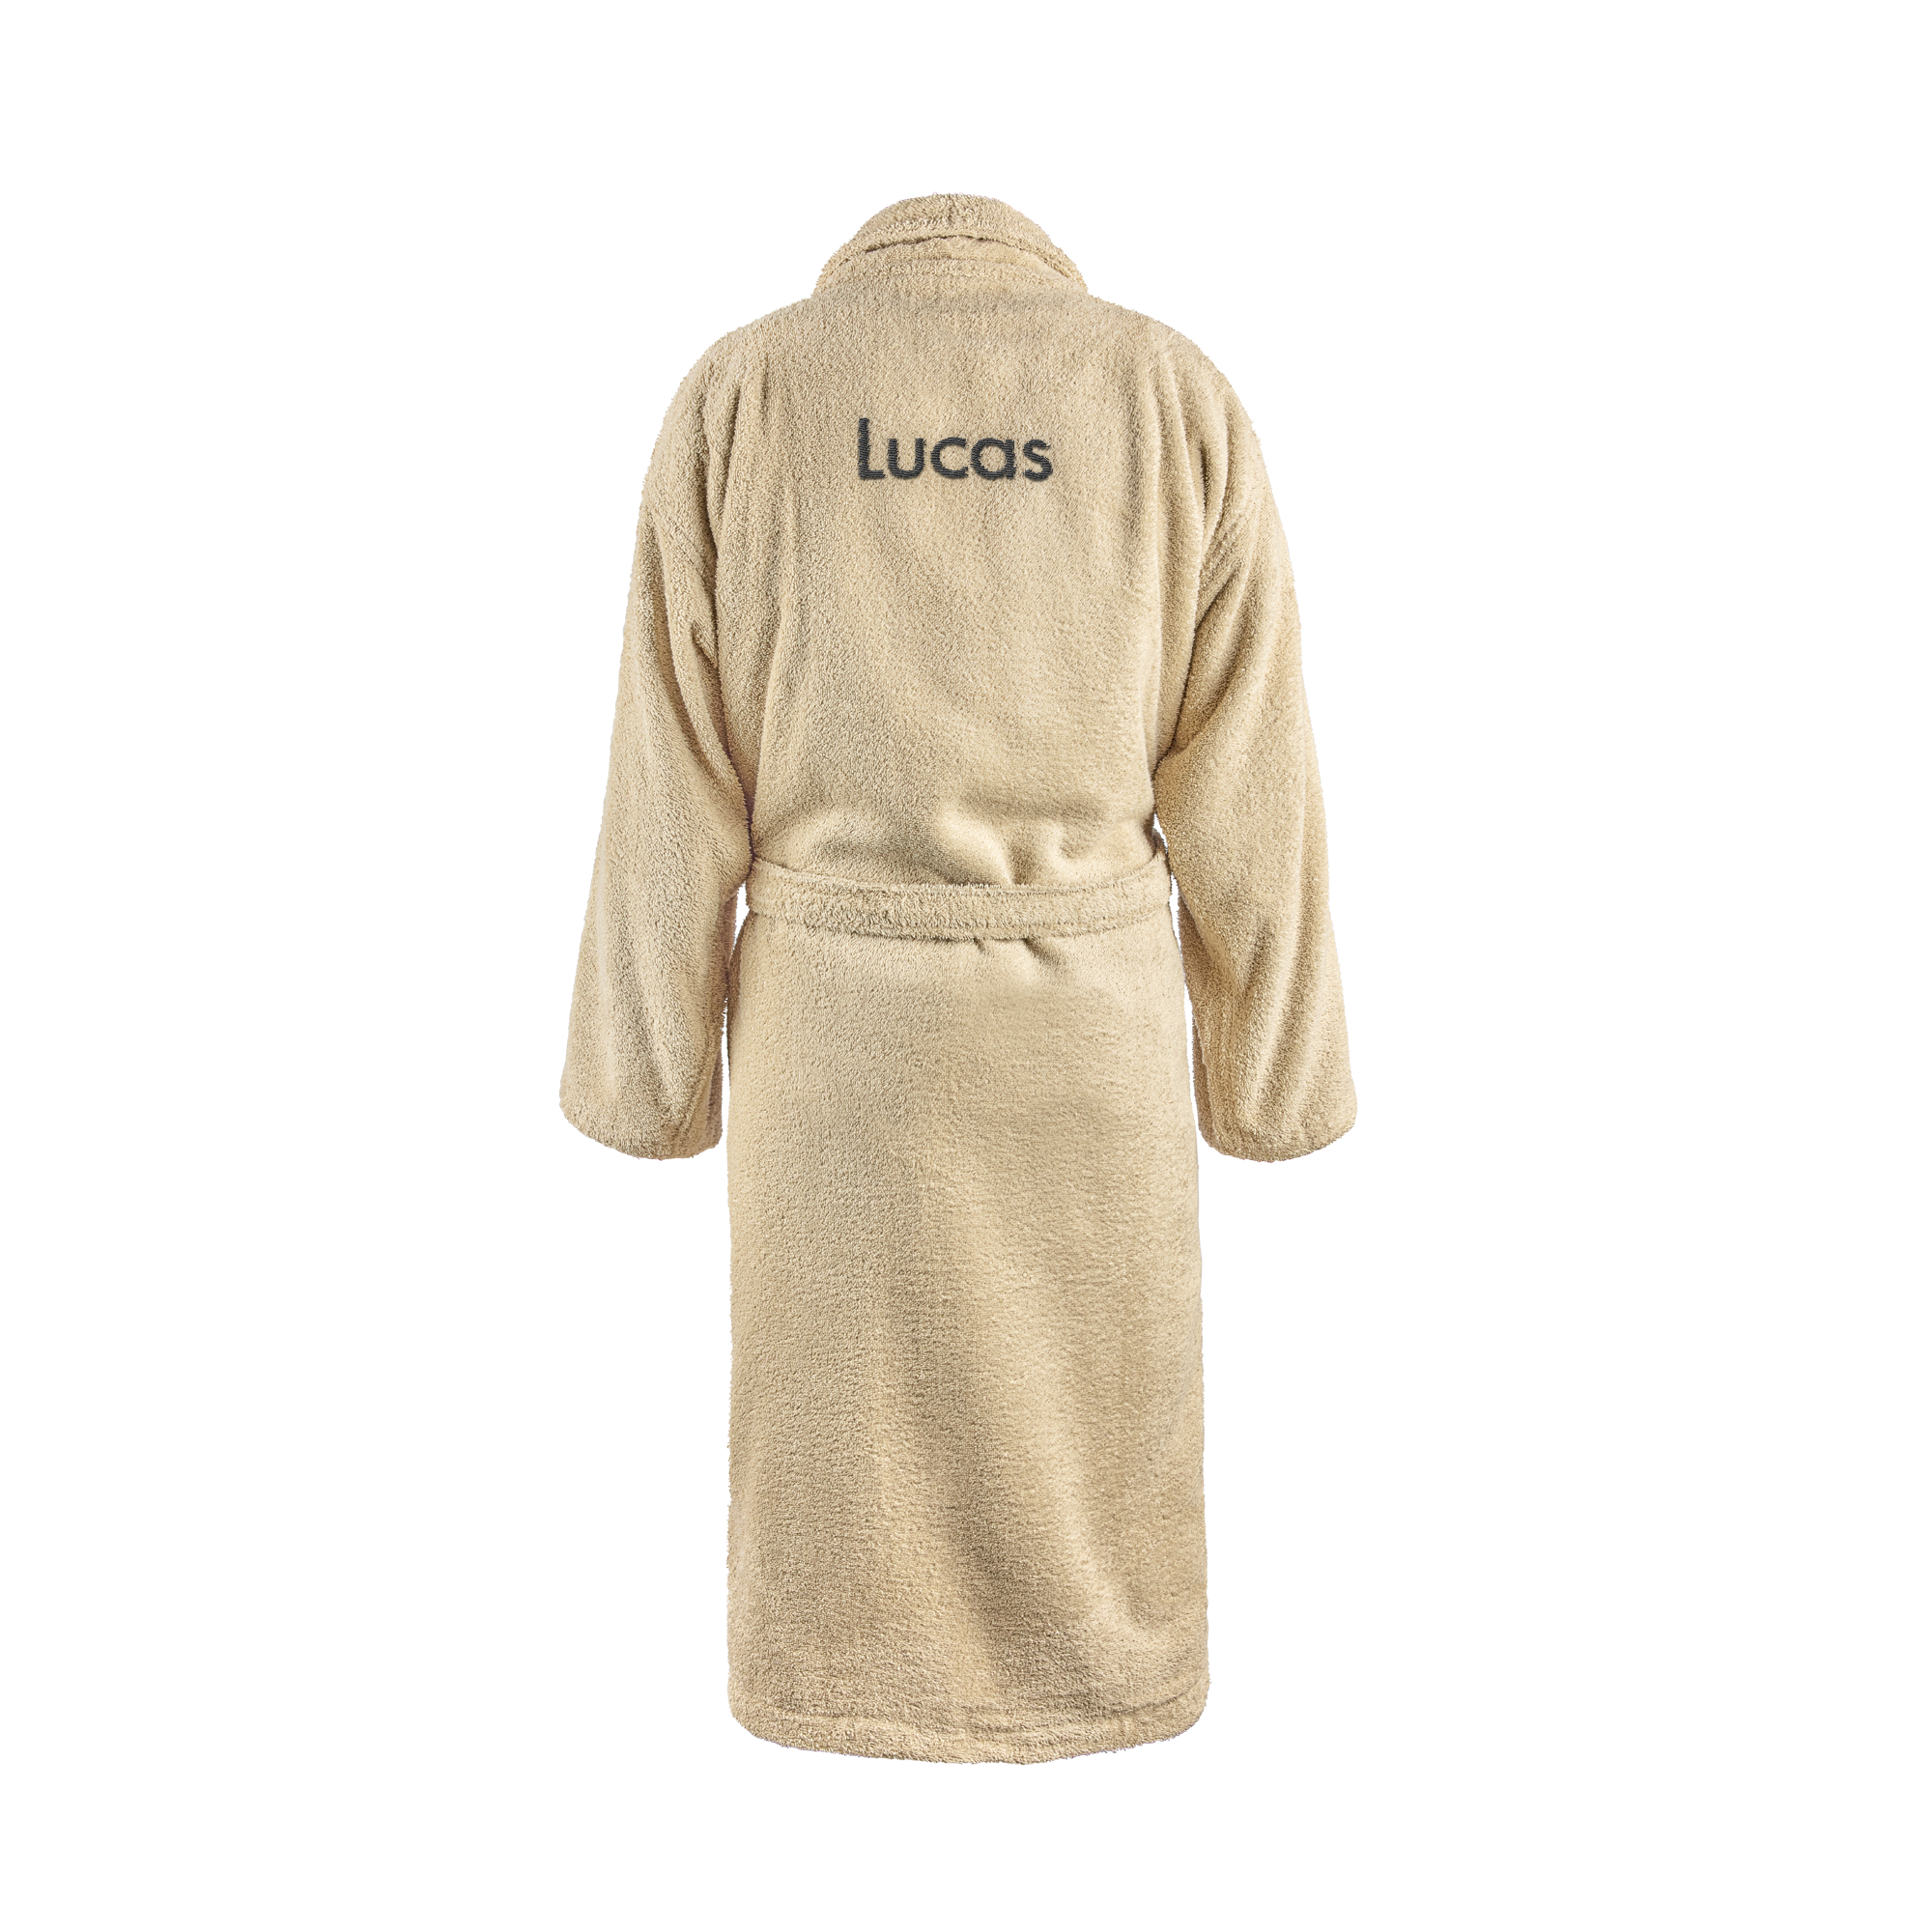 Personalised Embroidered Warm Any Name Dressing gown Hooded or shawl neck robe 